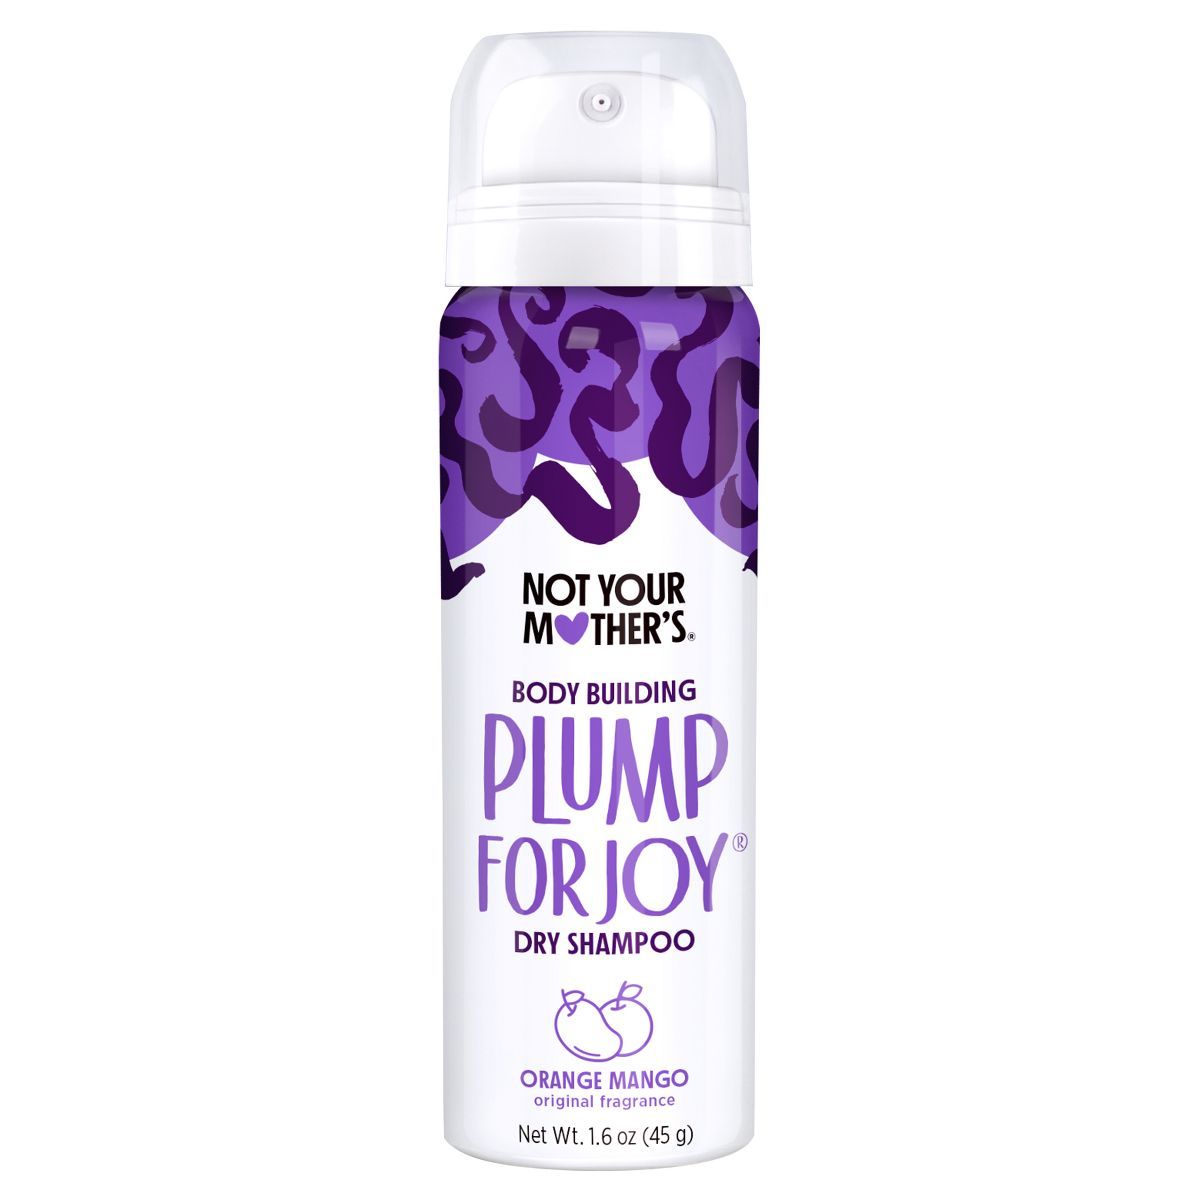 Not Your Mother's Plump for Joy Body Building Dry Shampoo | Target